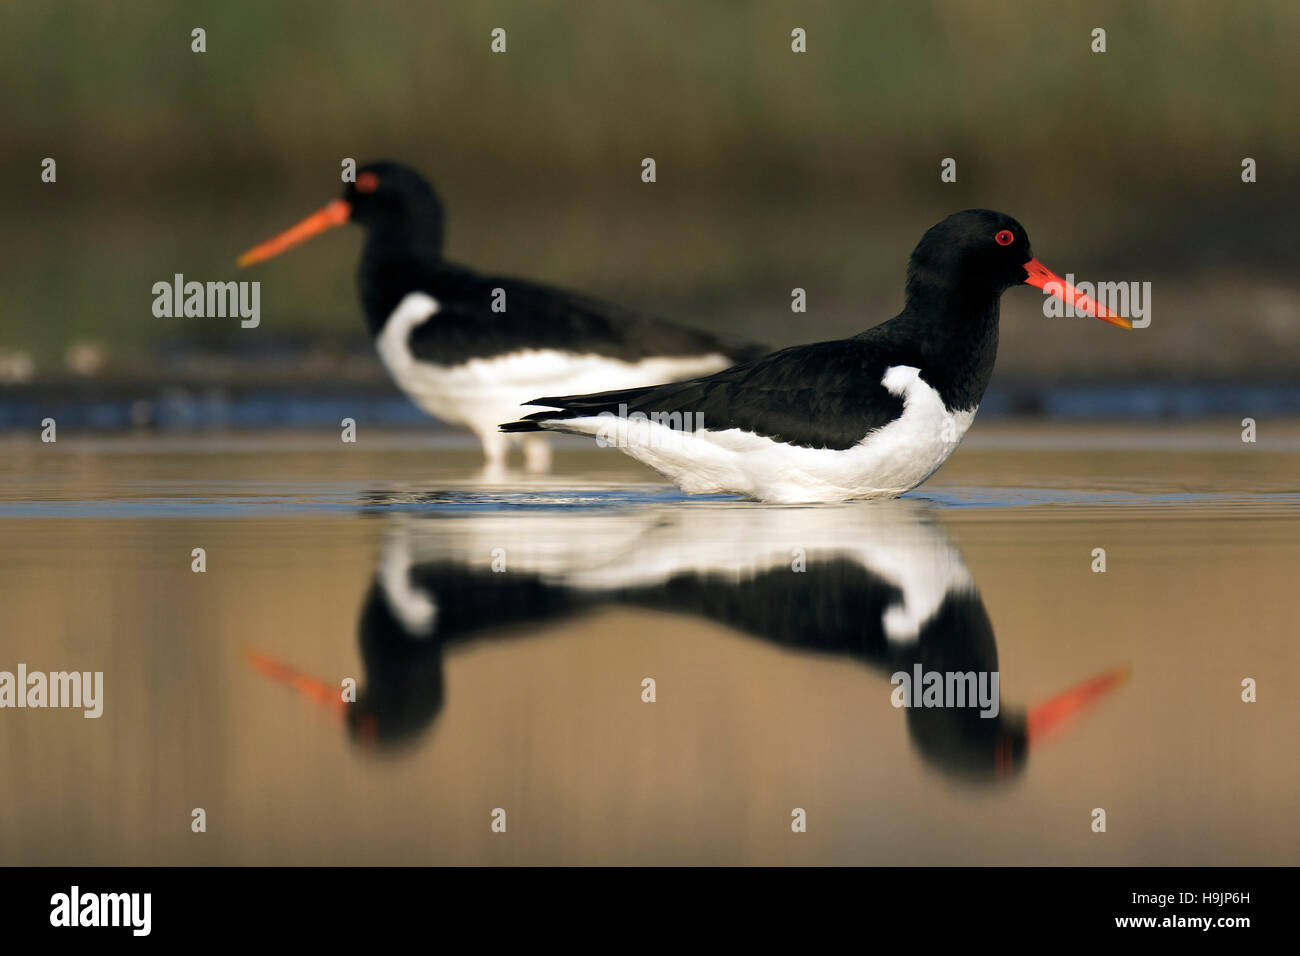 Two Eurasian oystercatchers / common pied oystercatcher (Haematopus ostralegus) foraging in shallow water of pond in wetland Stock Photo